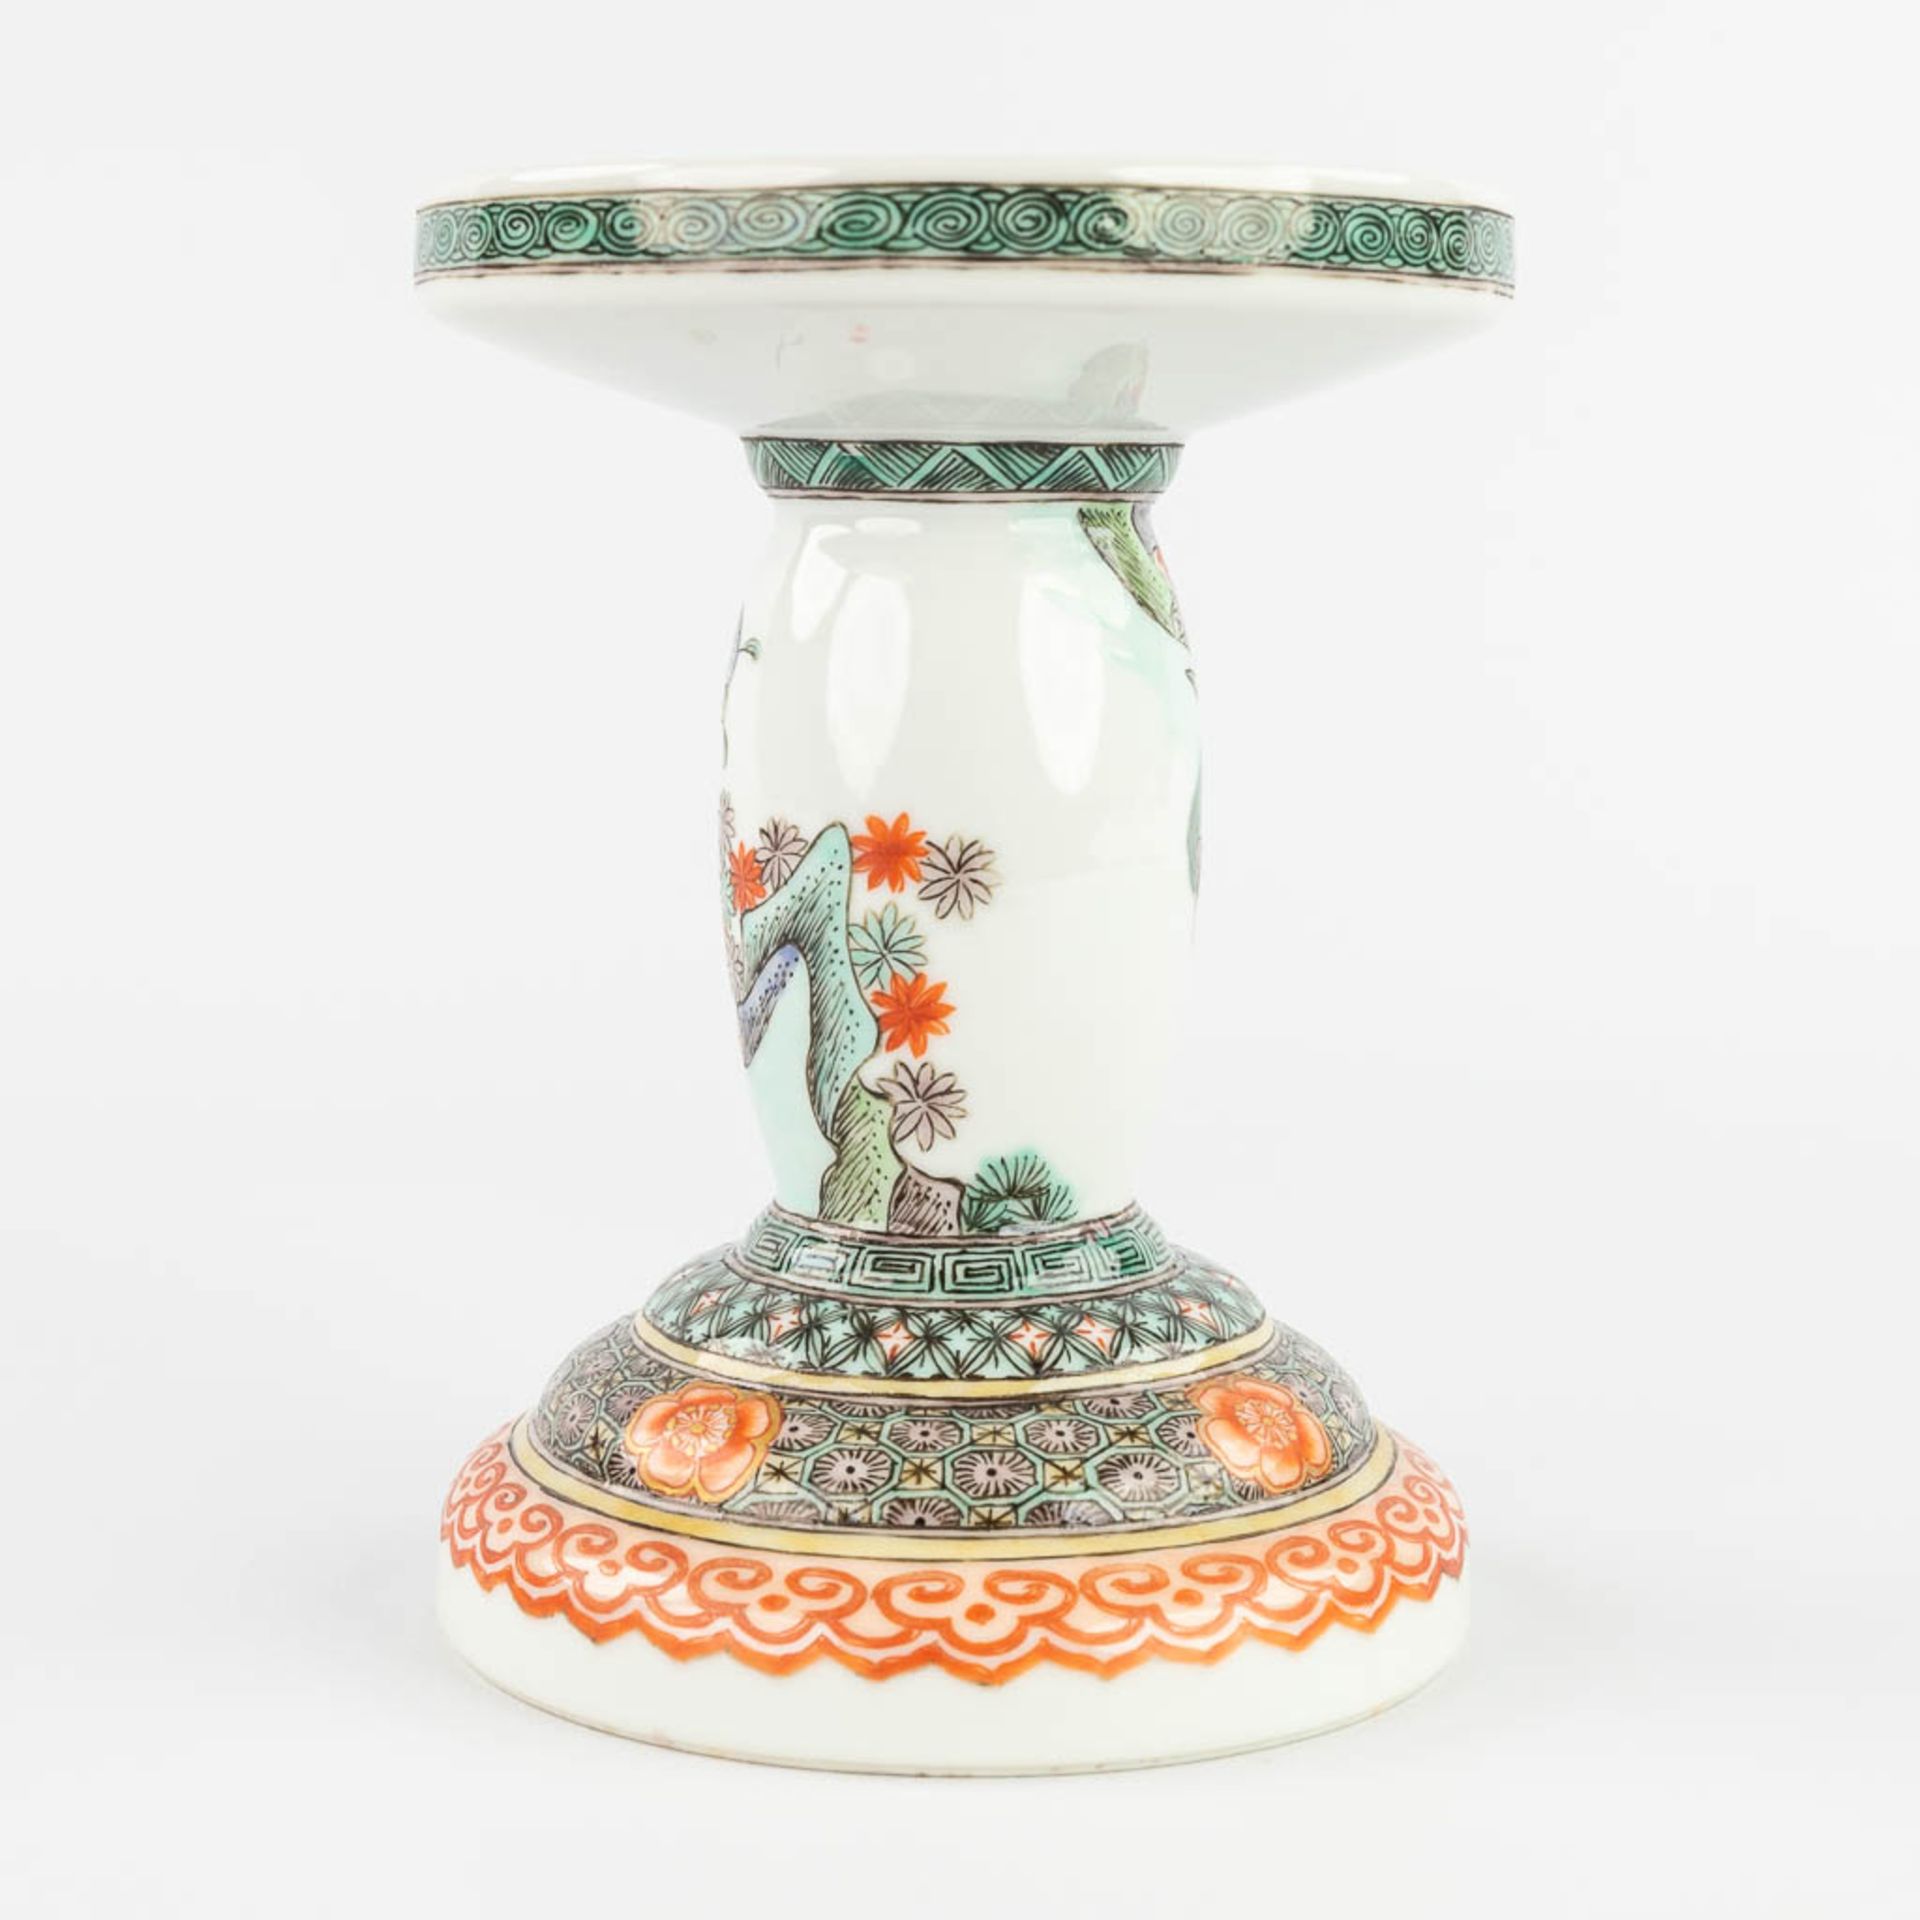 A Chinese porcelain candle holder, decorated with a foo dog. 20th C. (H:14,5 x D:11 cm) - Image 5 of 13